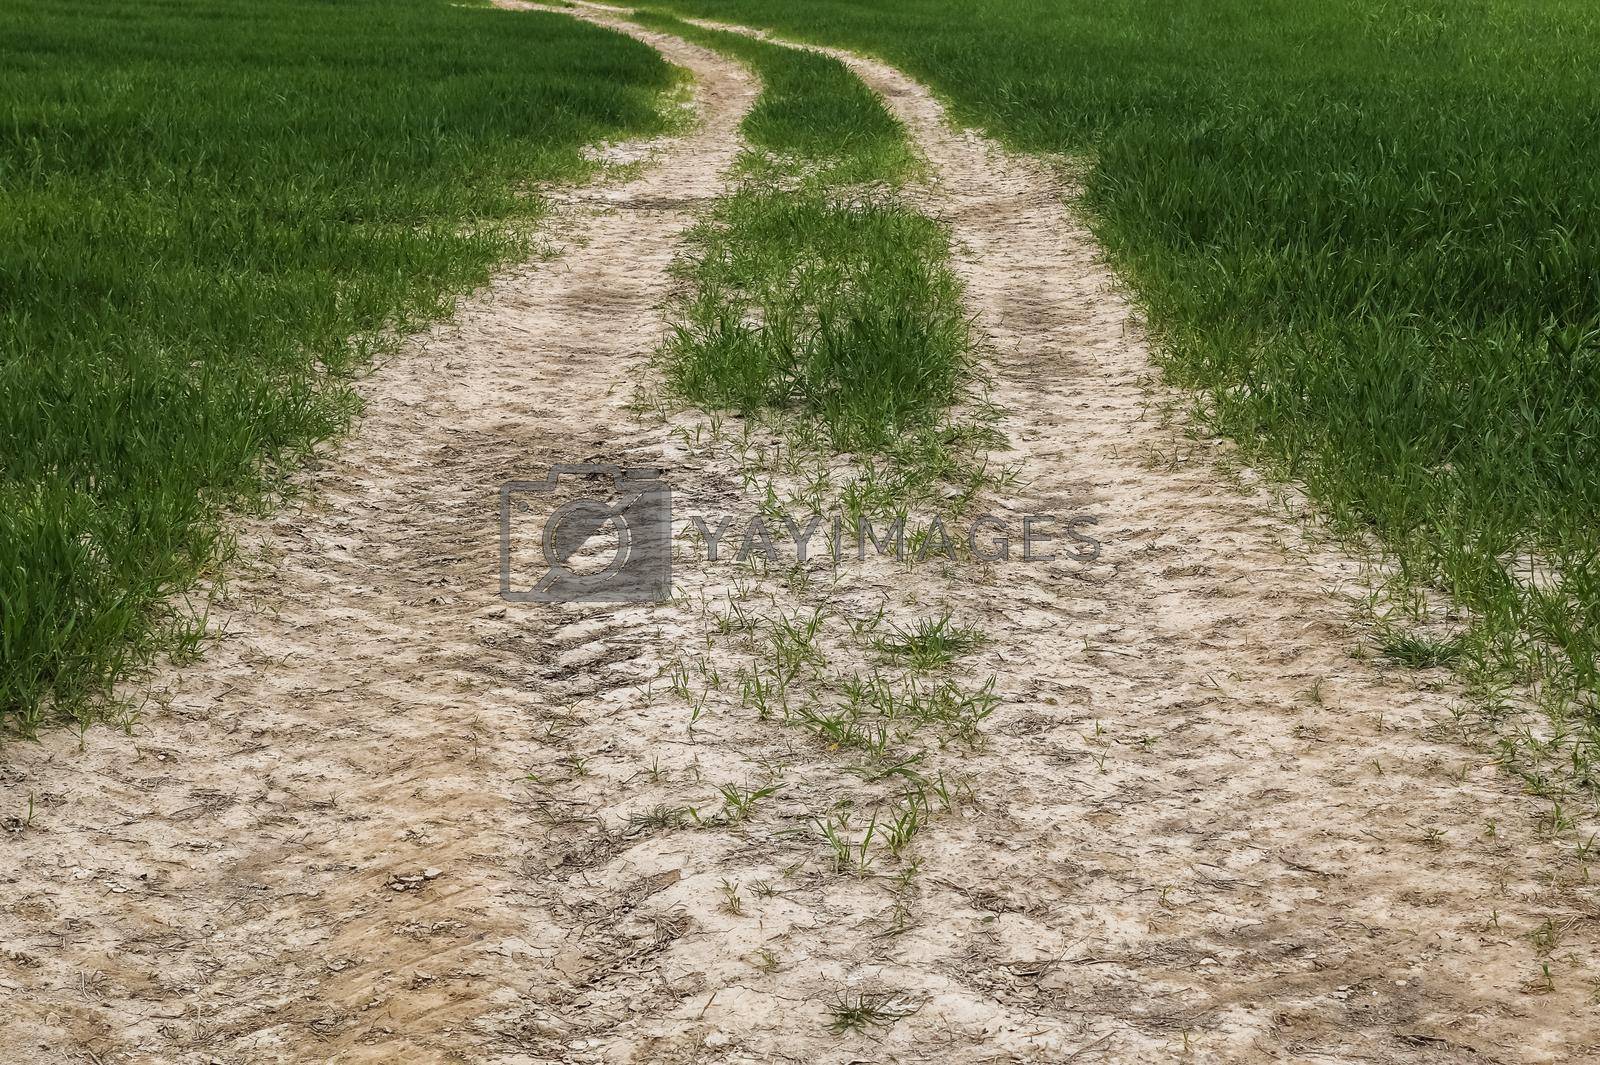 Royalty free image of Close up view on dry agricultural field grounds with cracks and tracks - farming background. by MP_foto71